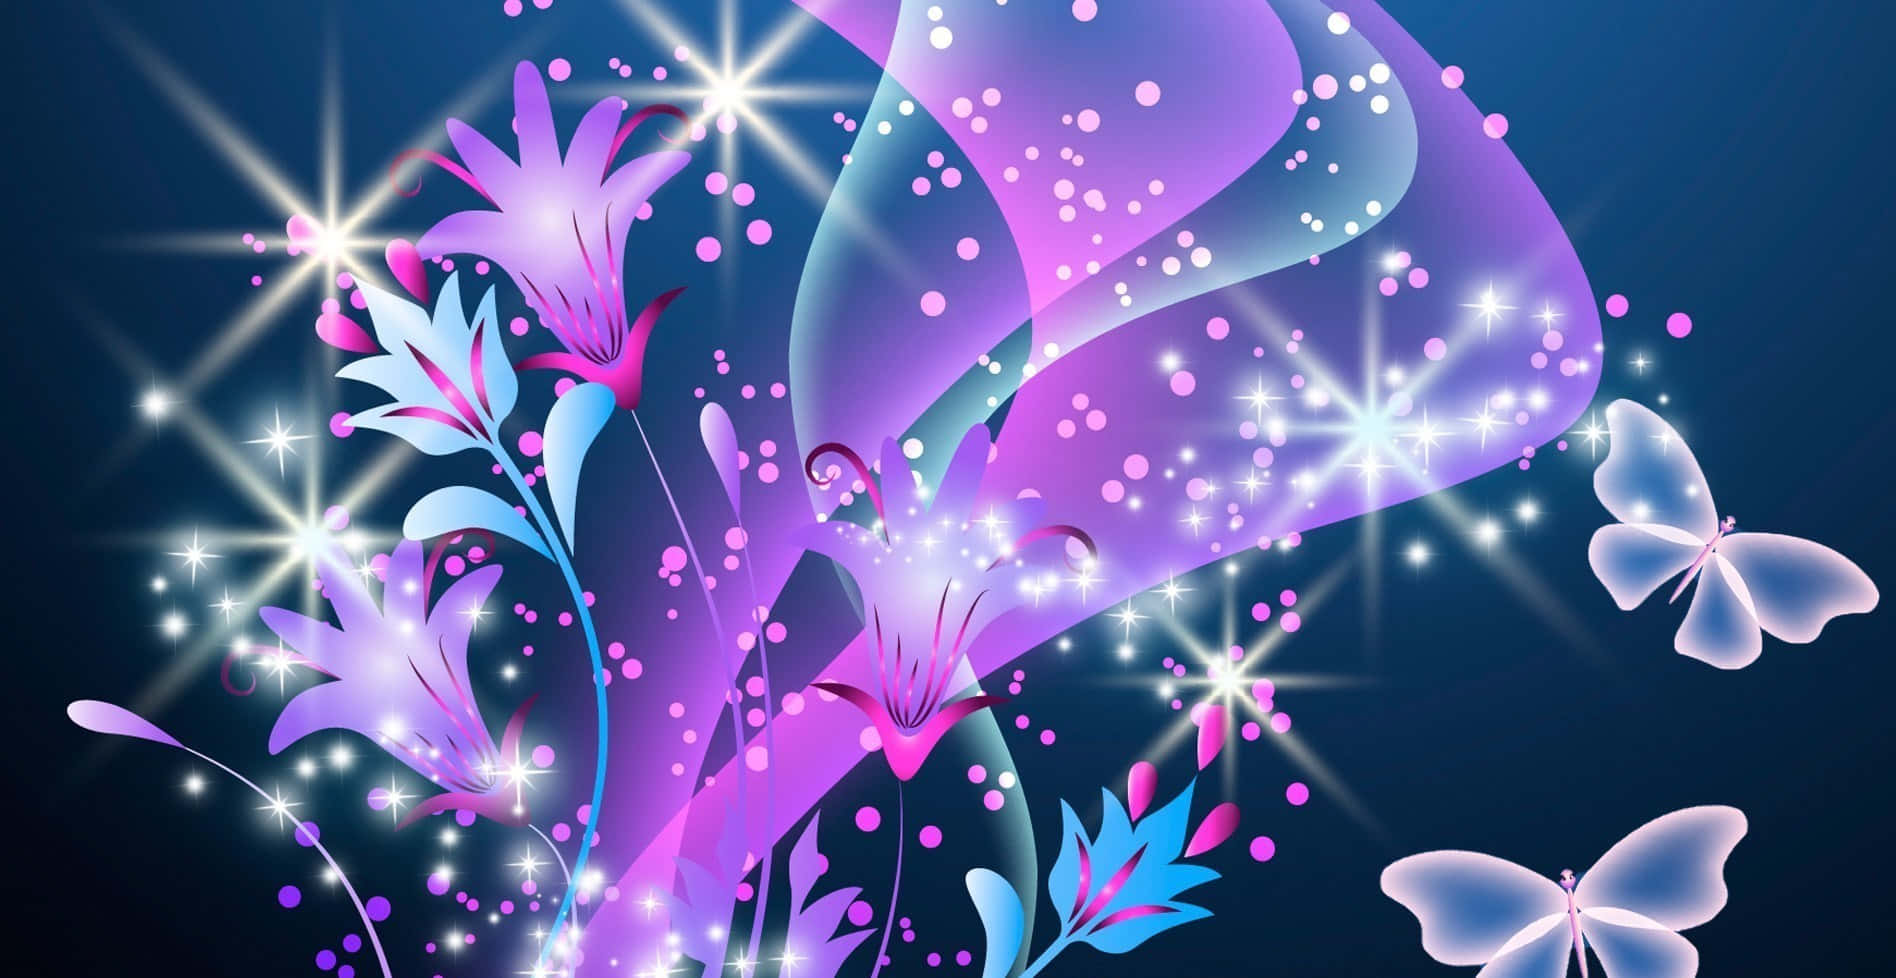 a purple and blue background with butterflies and stars Wallpaper